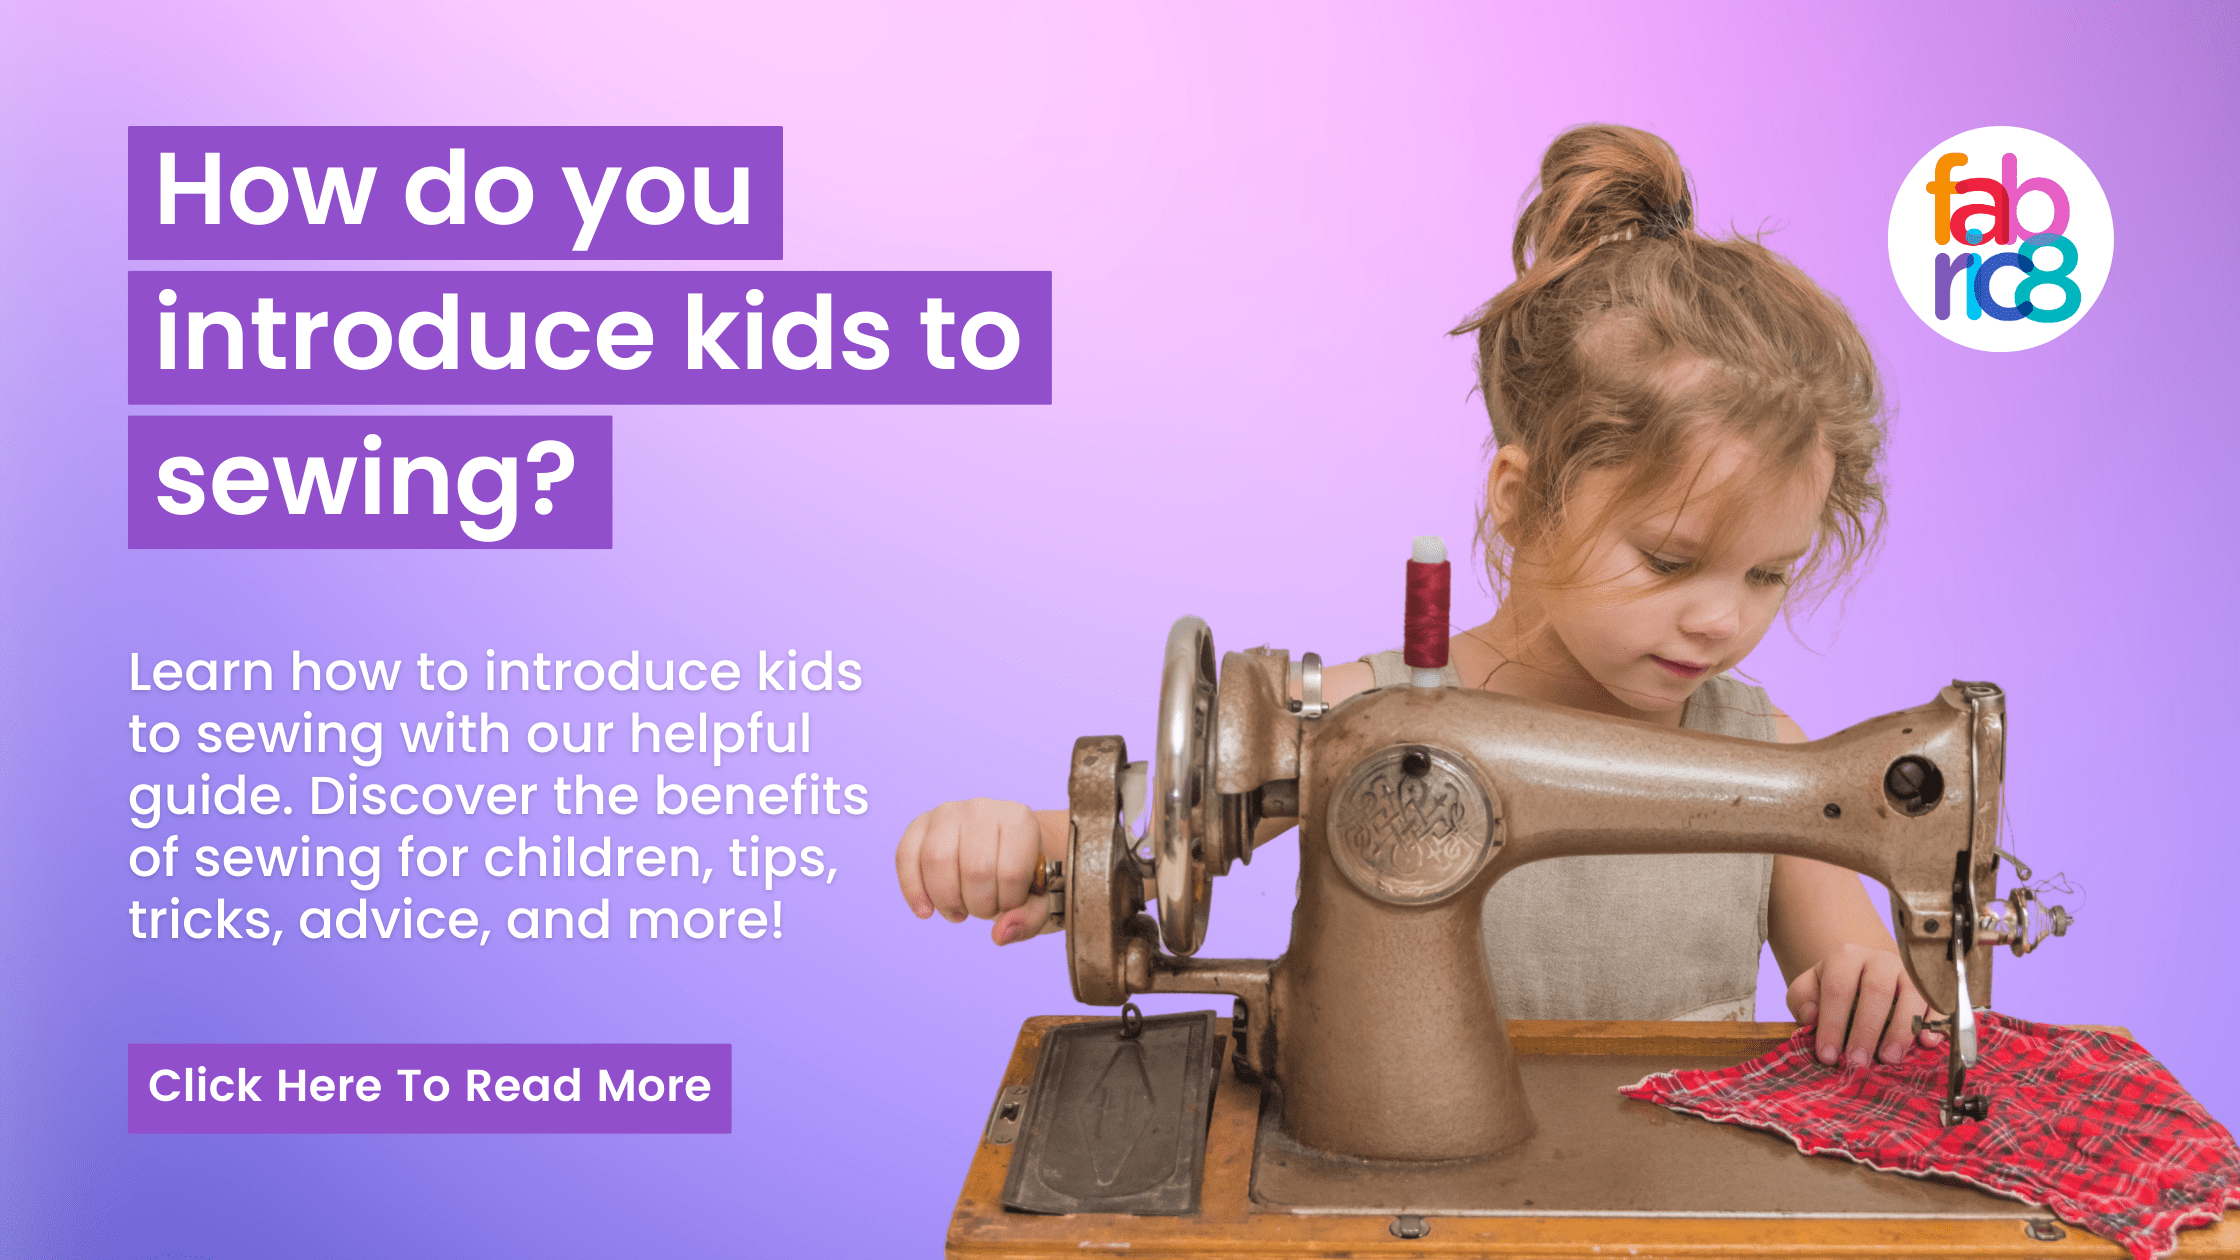 Introducing Kids to Sewing: Tips, Benefits, and Easy Projects